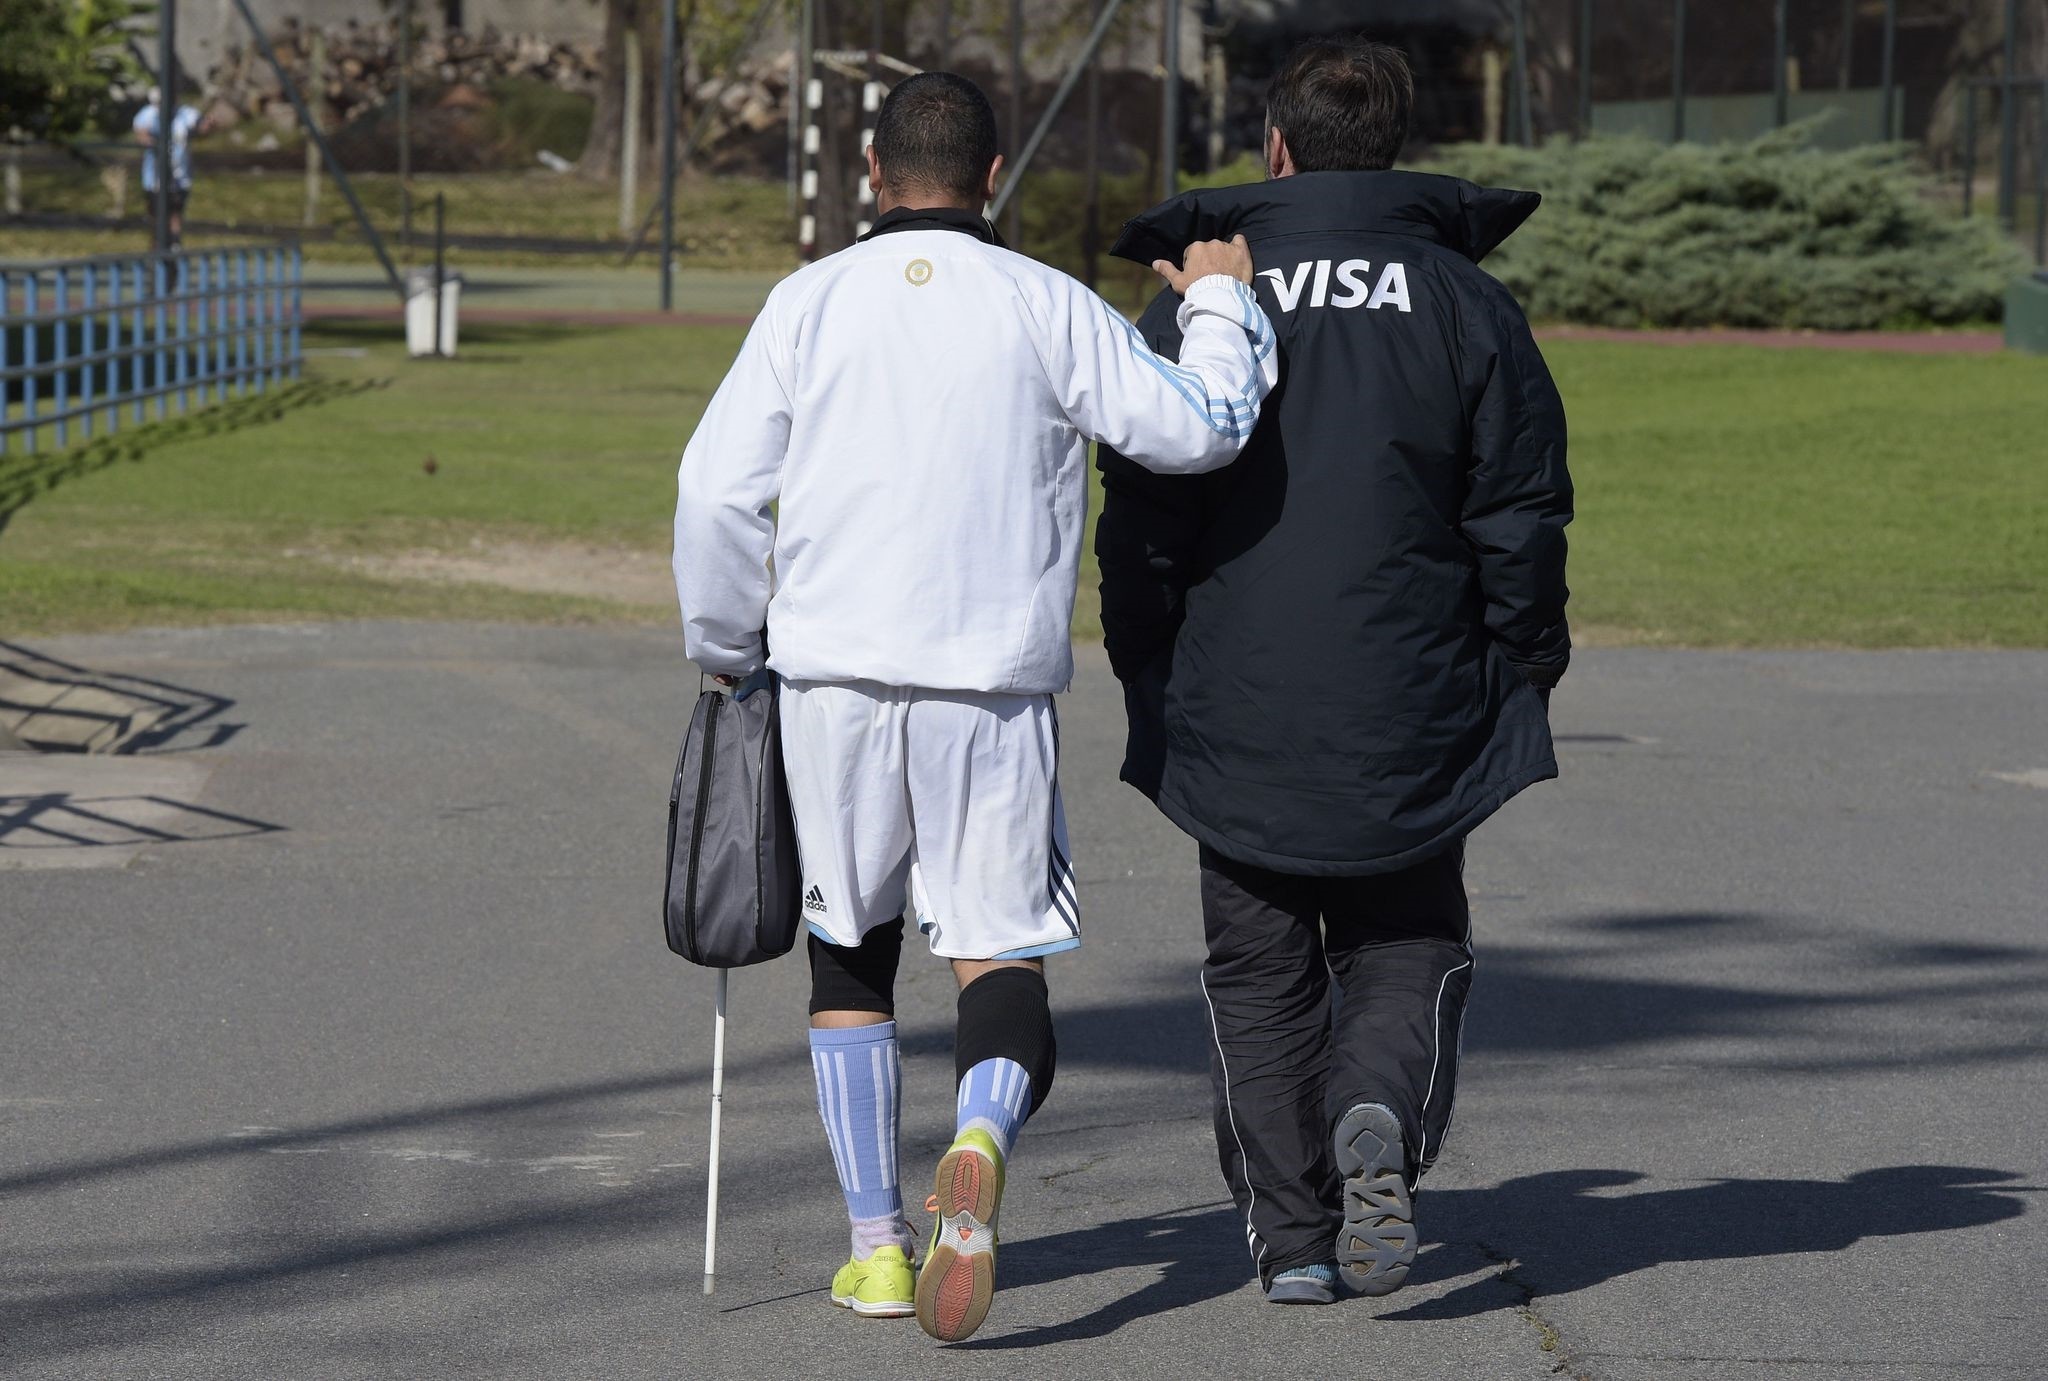 Argentine paralympic blind football forward Silvio Velo (L) walks assited by Boca Juniors blind football coach Mariano Arnal before a training session in Buenos Aires on May 19, 2016, ahead of the Rio 2016 Paralympic Games. (AFP Photo)